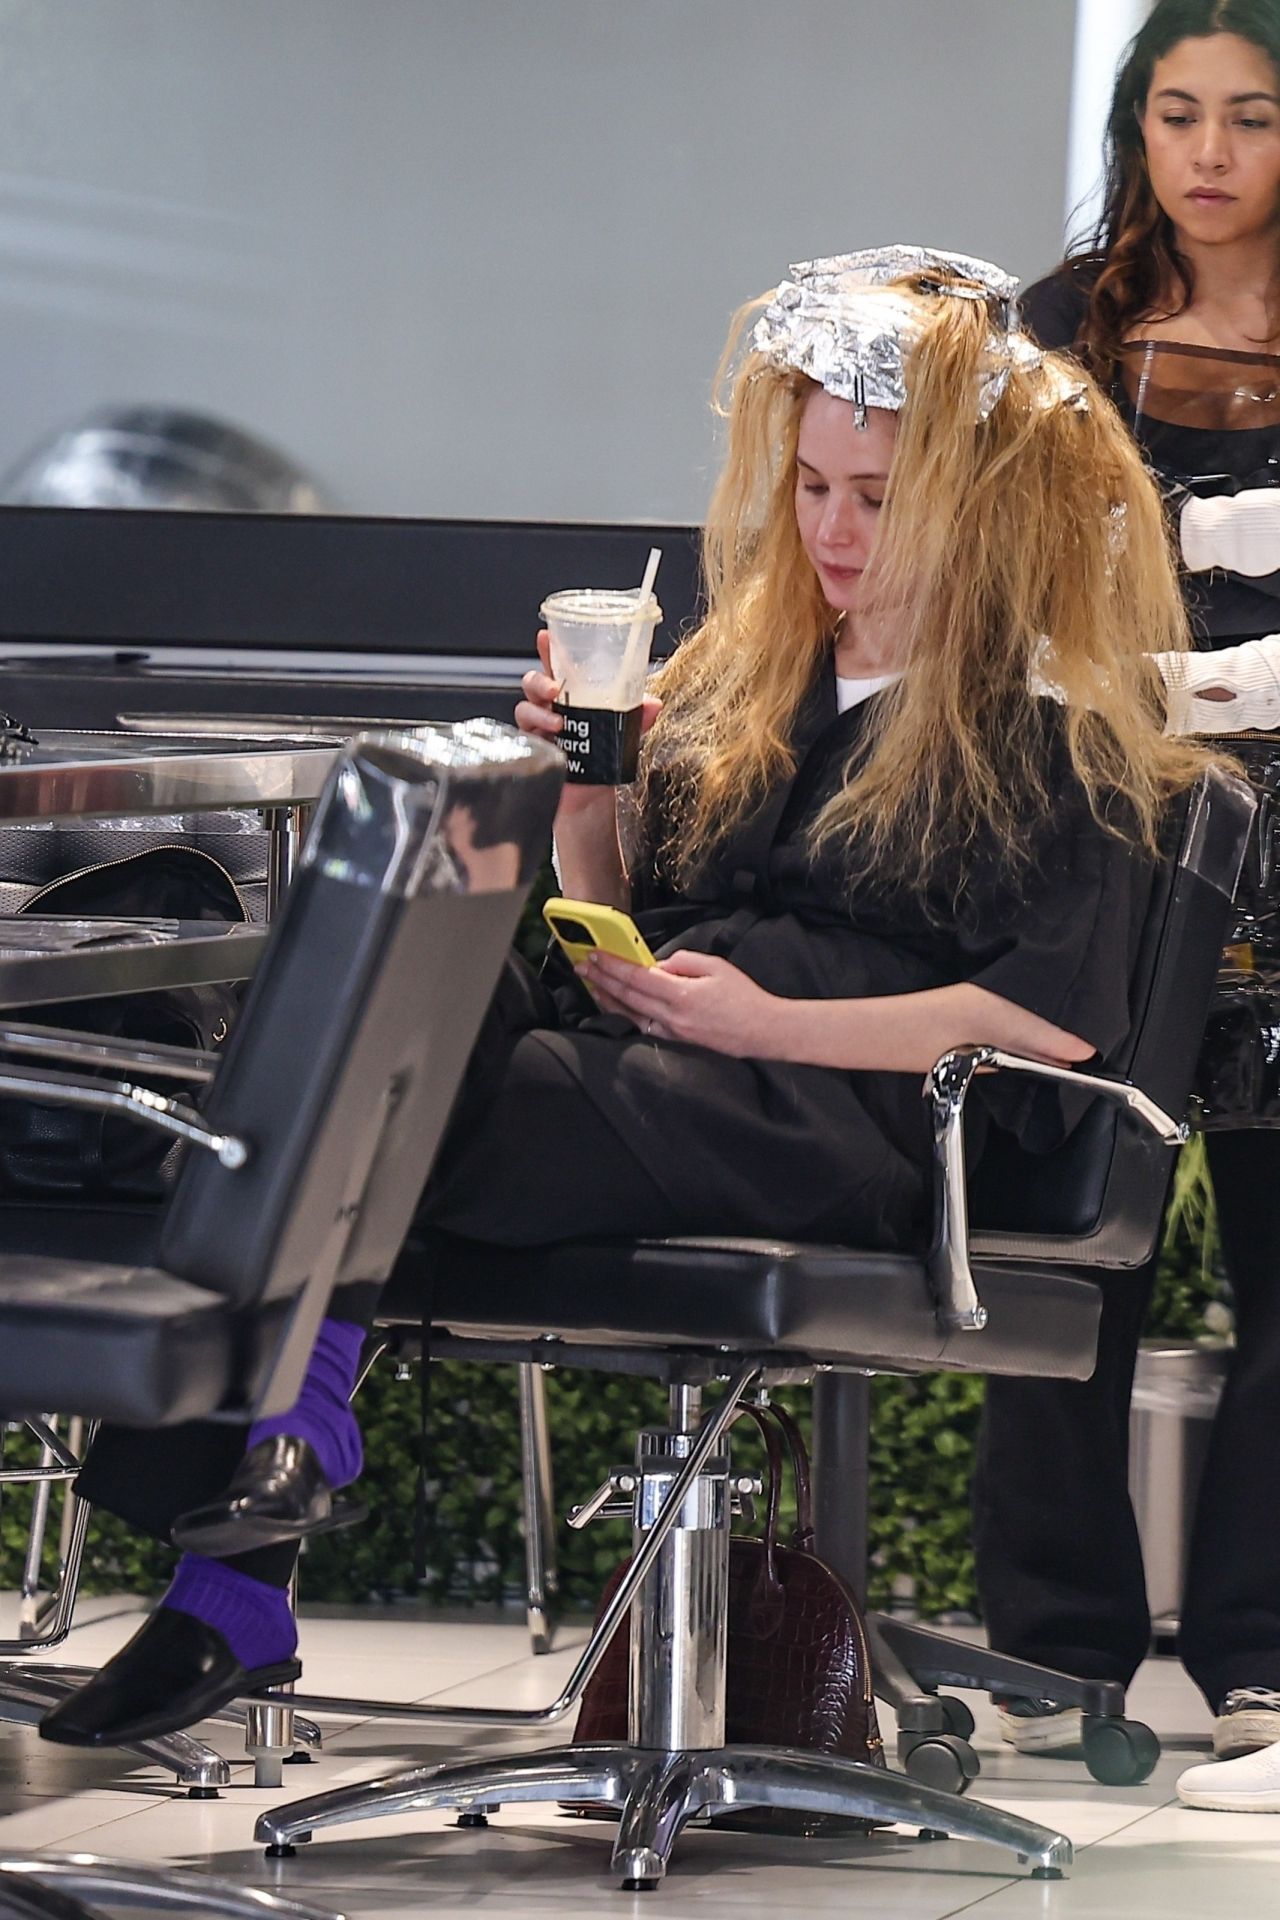 JENNIFER LAWRENCE AT A HAIR SALON IN LOS ANGELES6